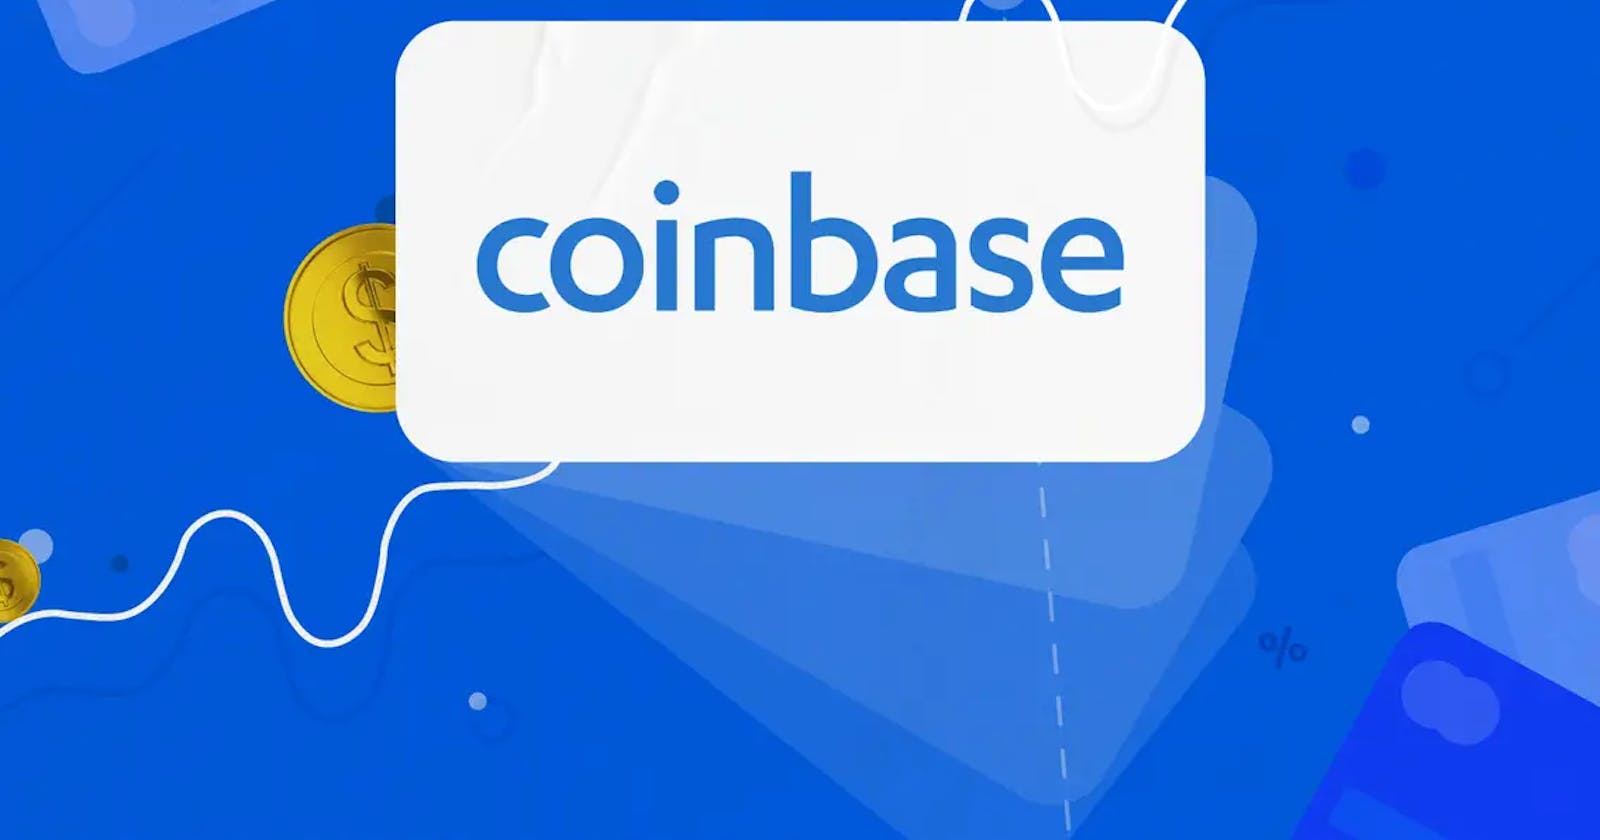 Accessing the Coinbase App from the Coinbase wallet